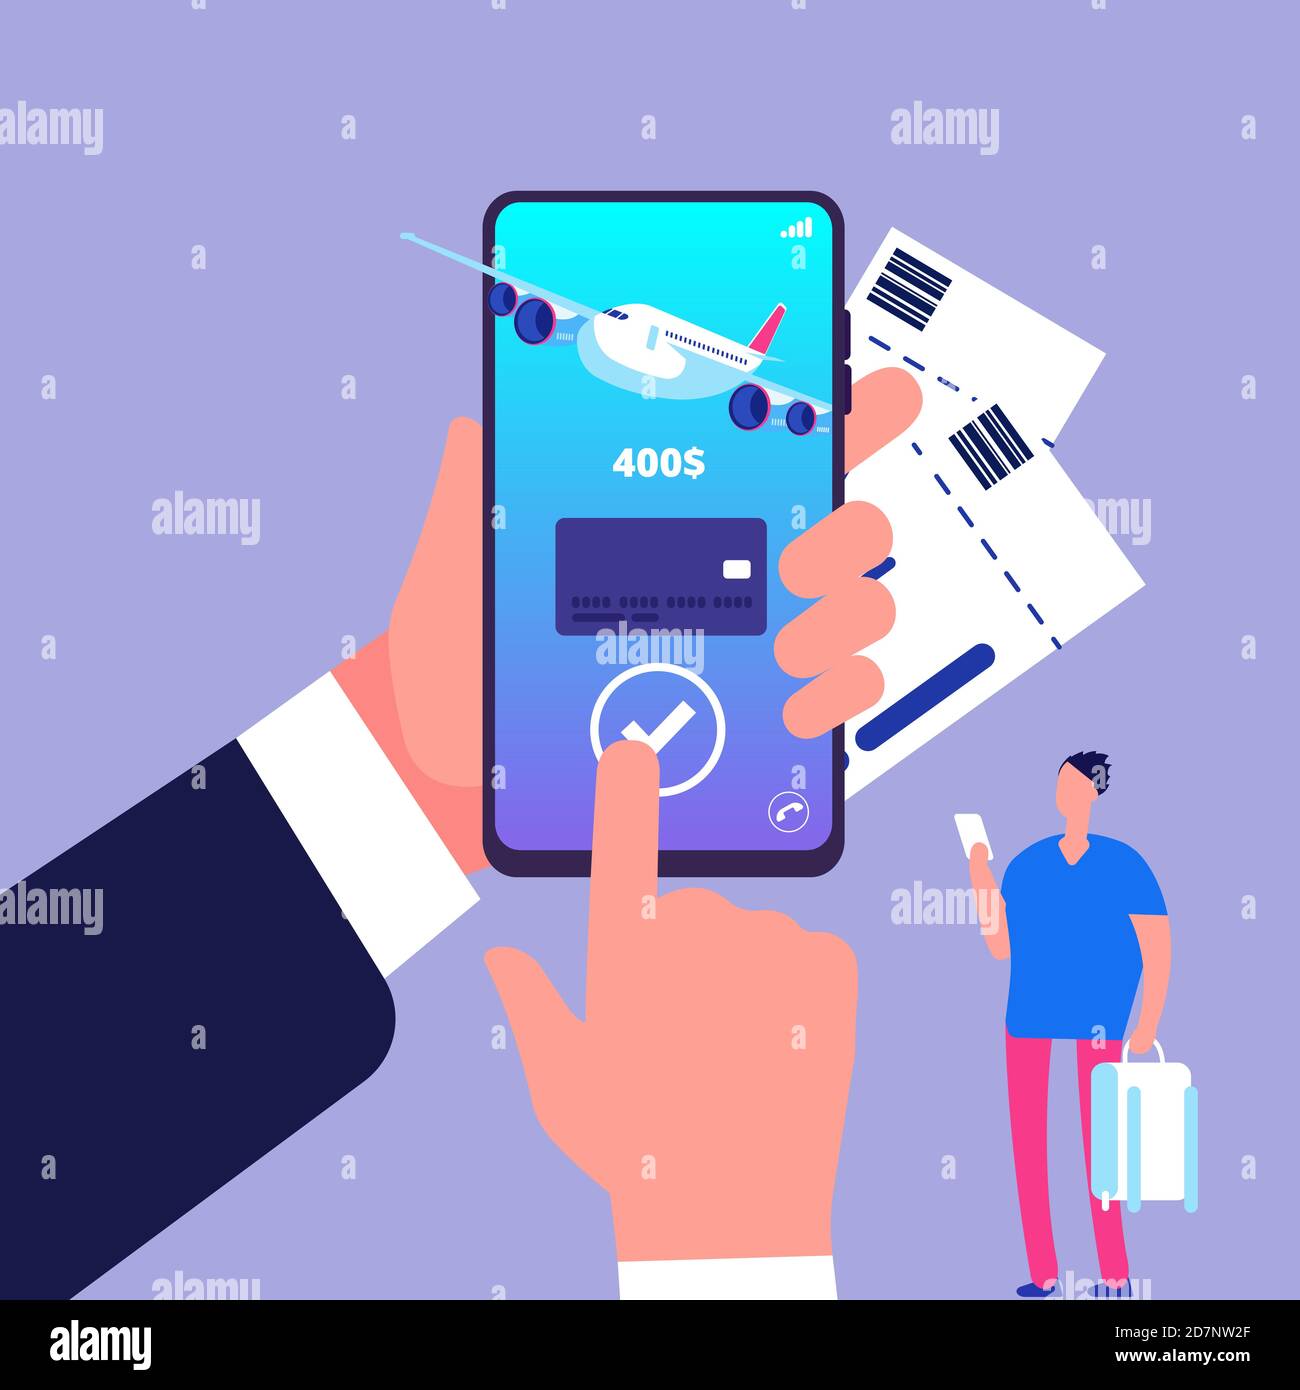 Online ticket concept. Buying tickets with smartphone. Online payment vector illustration. Buying ticket to flight for travel, journey, airplane trip Stock Vector